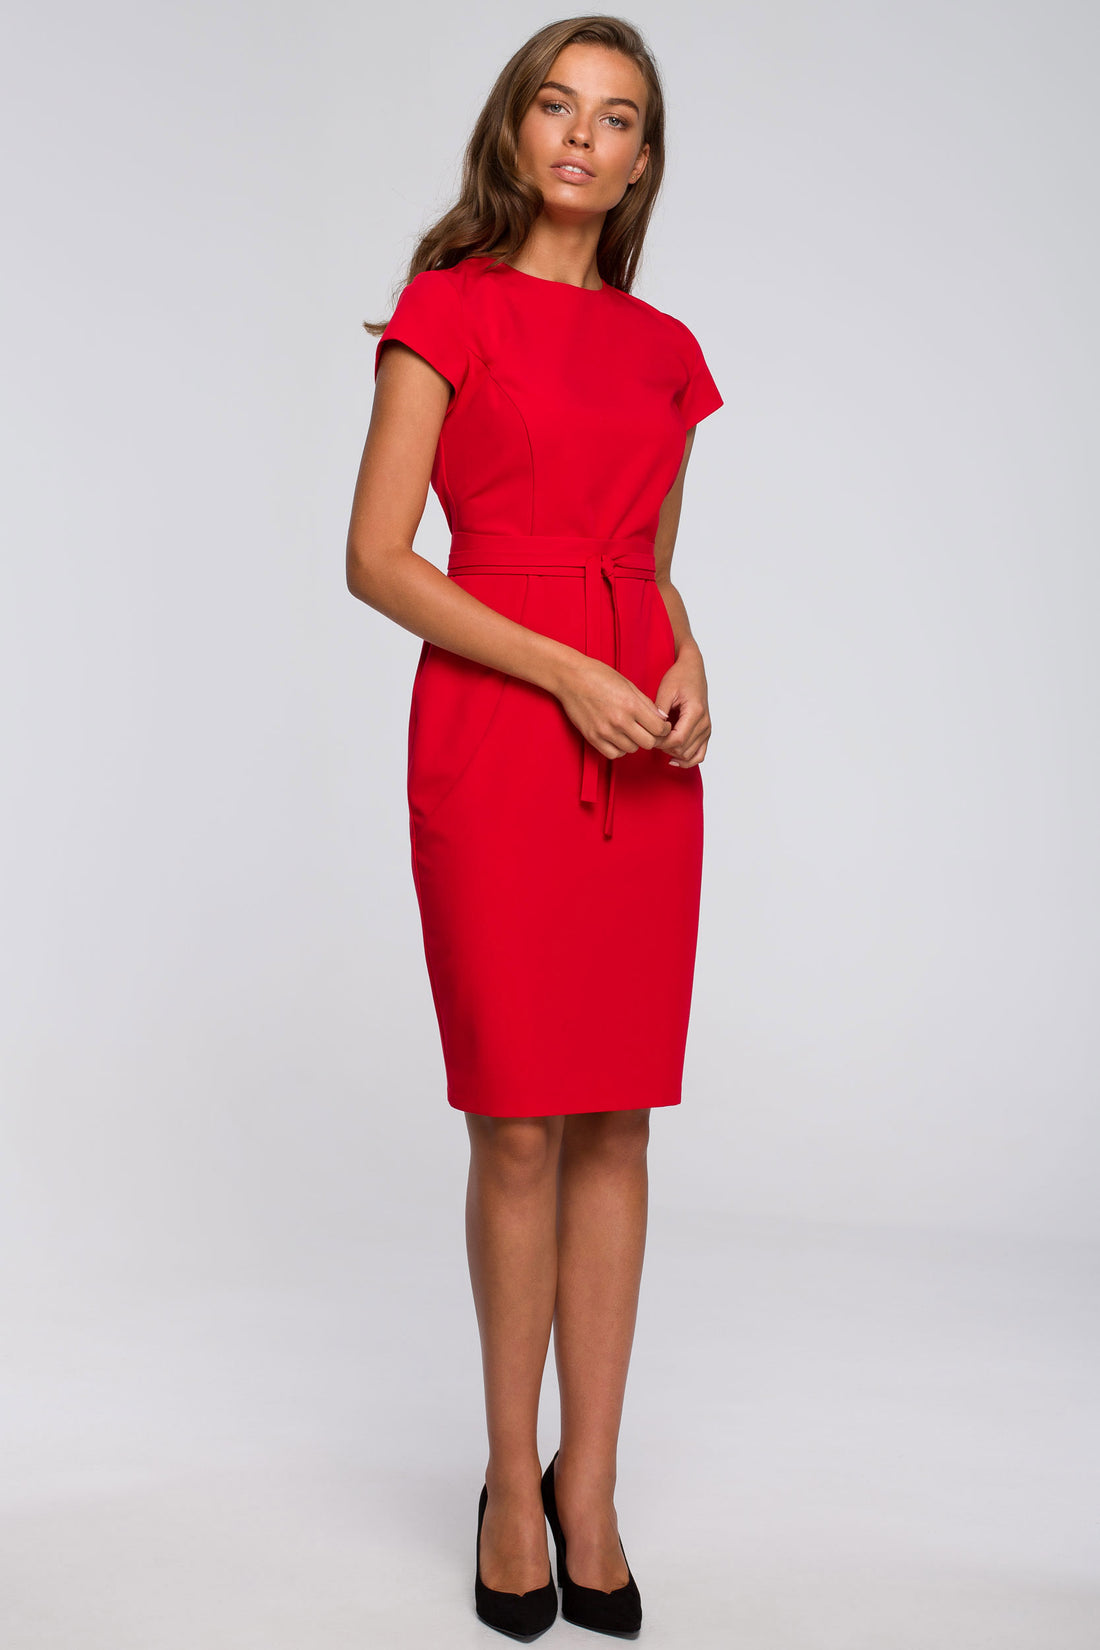 Red Pencil Dress with Tie Belt